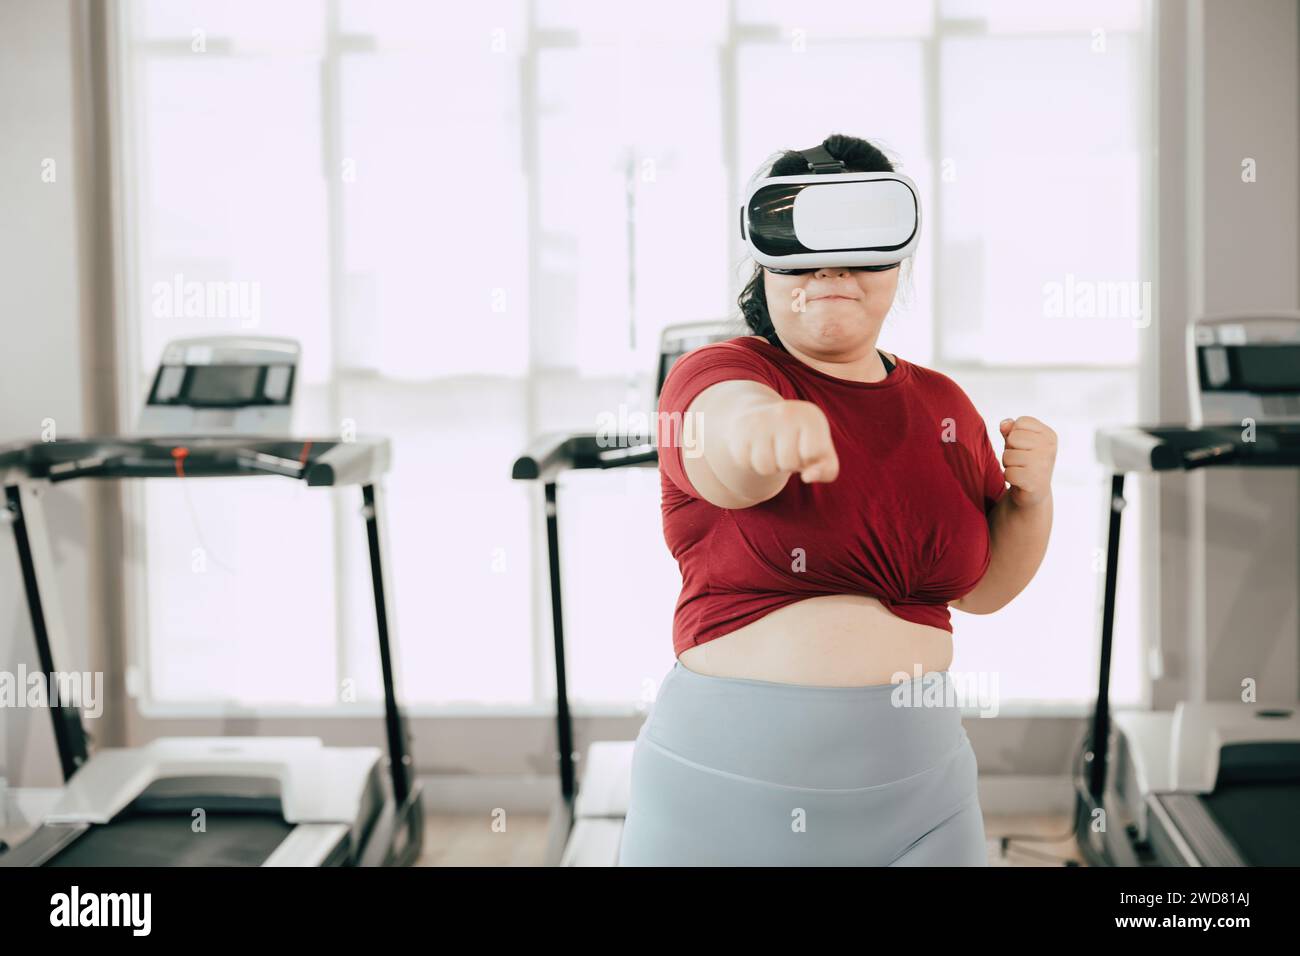 fat women with VR headset play visual reality sport game for exercise. people using modern technology for healtcare concept. Stock Photo